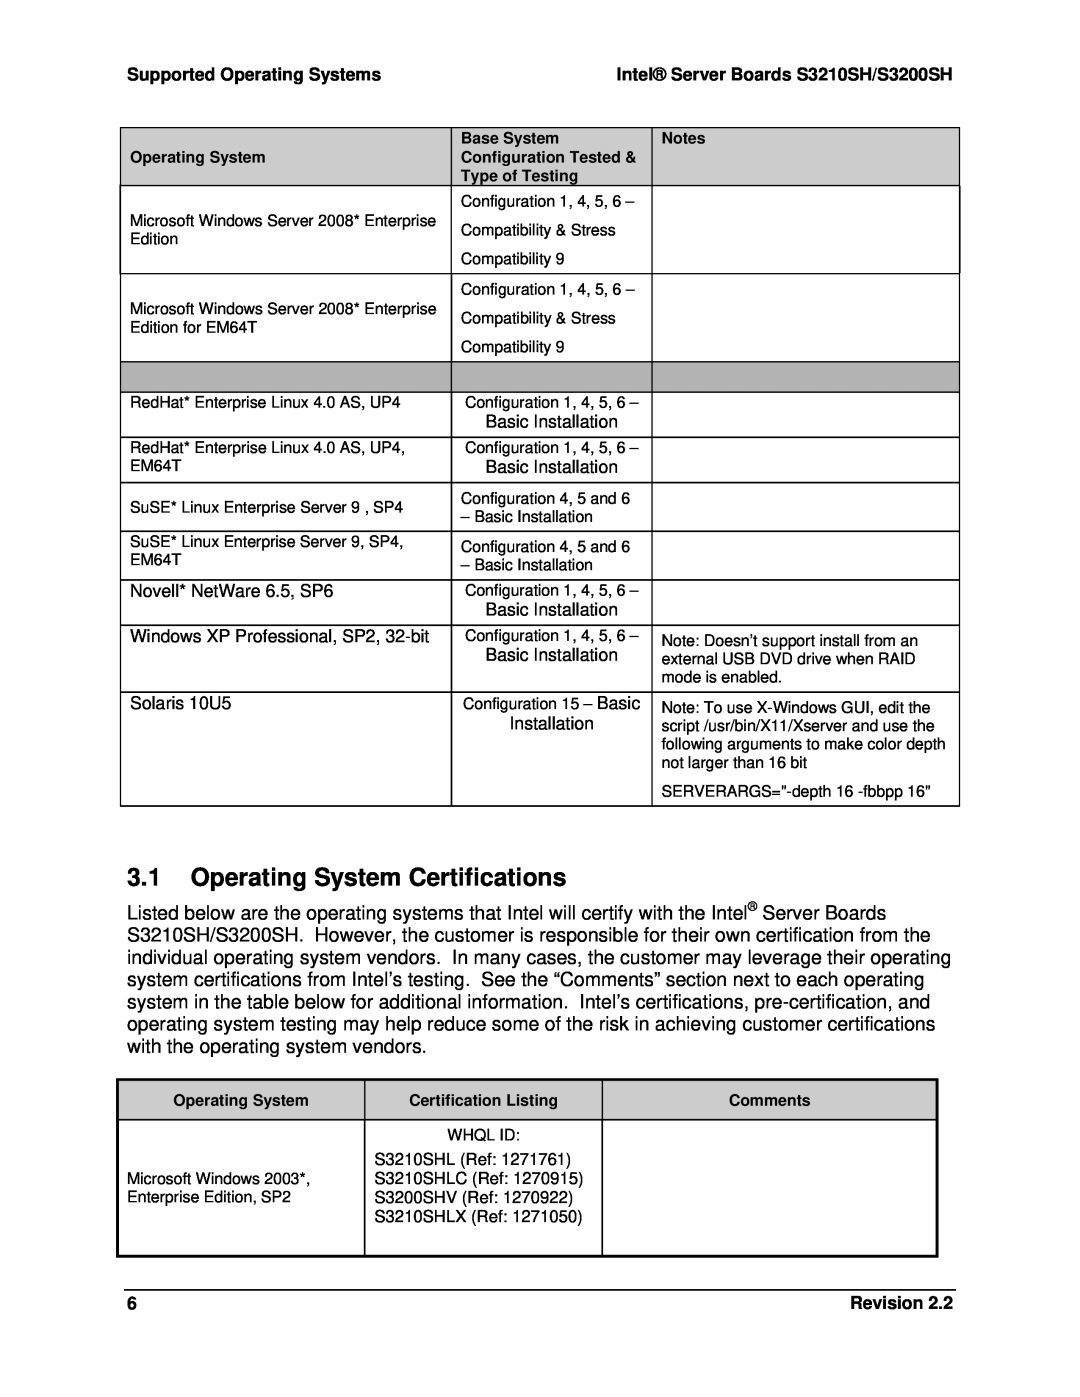 Intel 3.1Operating System Certifications, Supported Operating Systems, Intel Server Boards S3210SH/S3200SH, Revision 